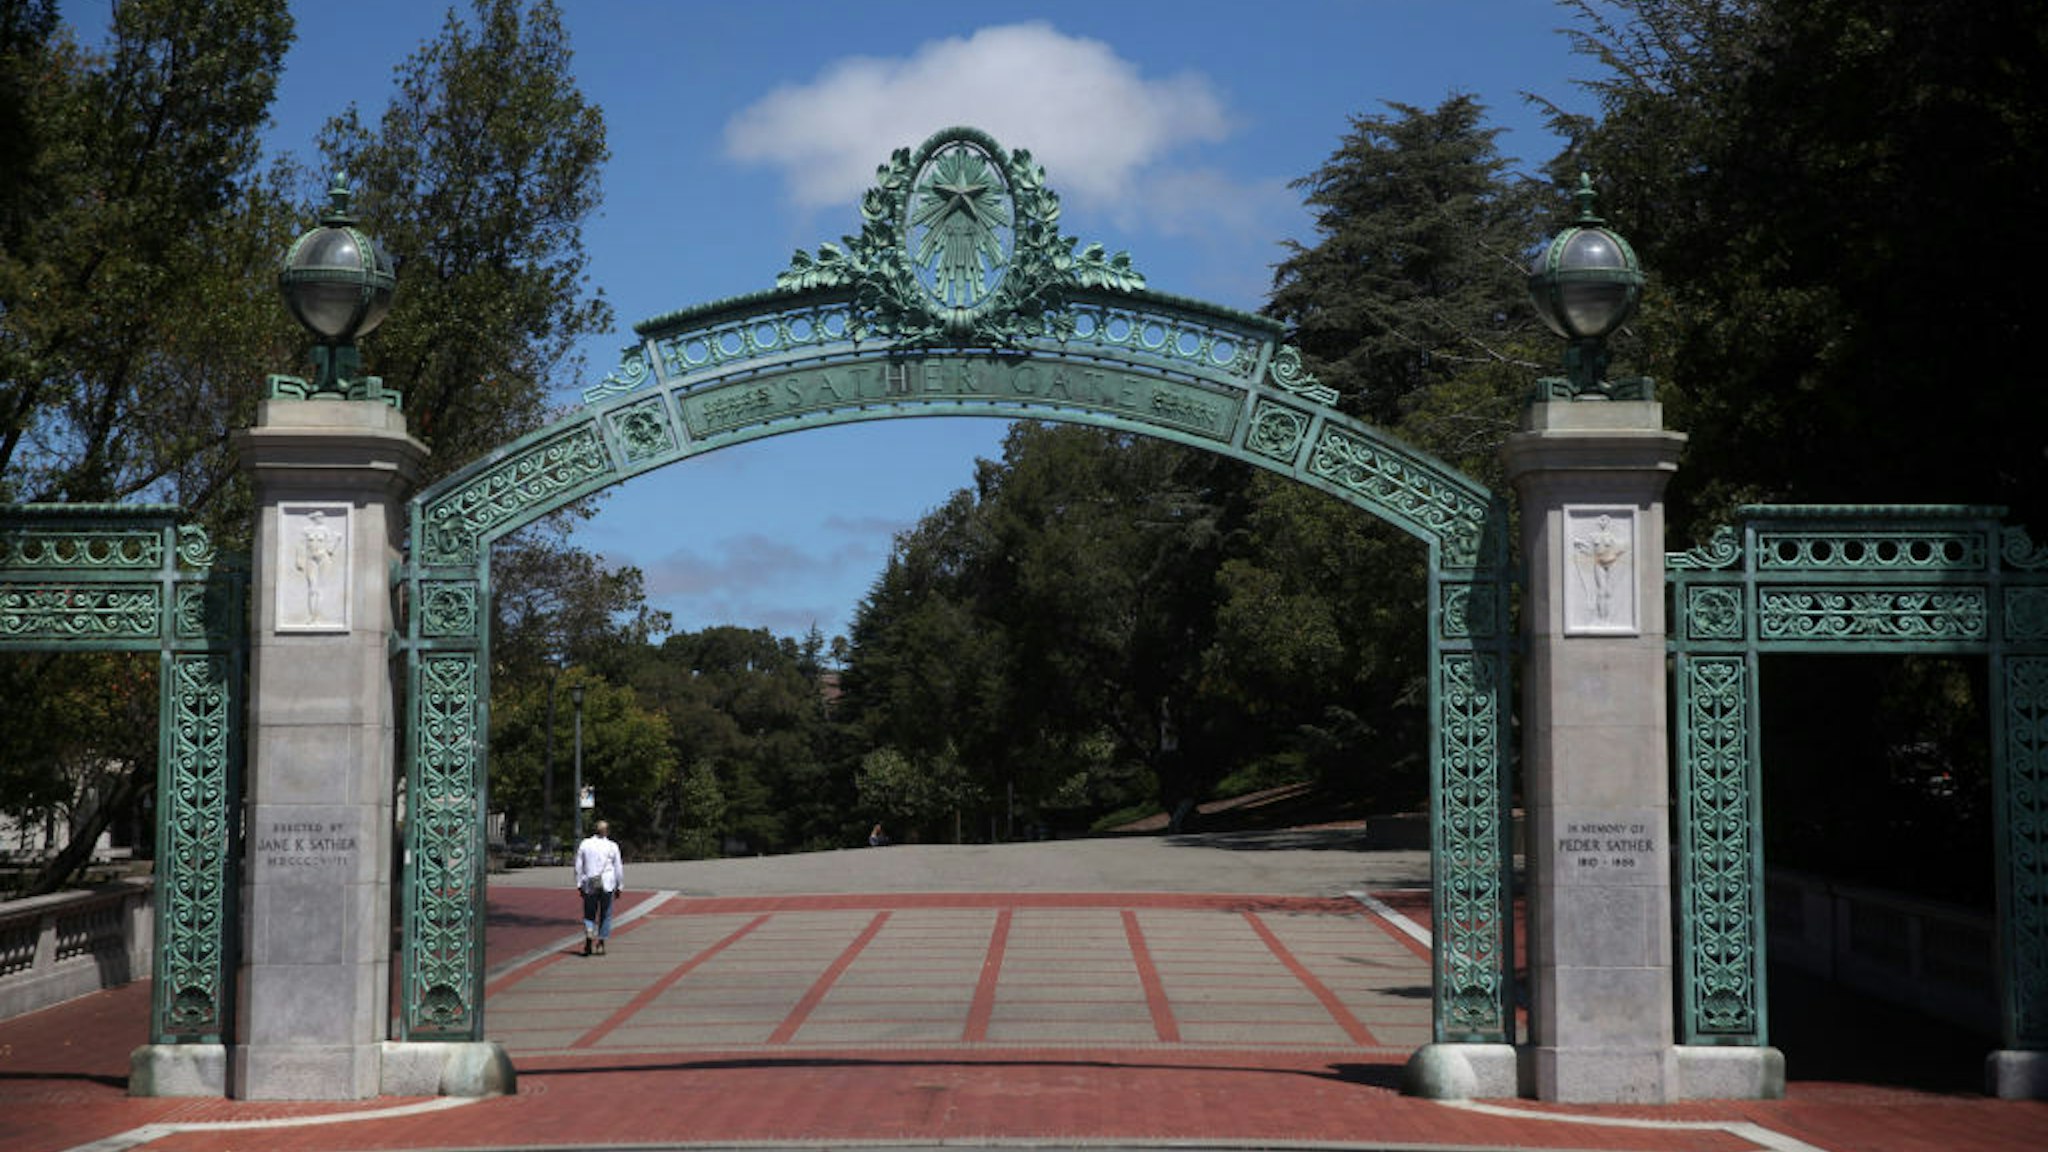 BERKELEY, CALIFORNIA - JULY 22: A lone pedestrian walks by Sather Gate on the U.C. Berkeley campus on July 22, 2020 in Berkeley, California. U.C. Berkeley announced plans on Tuesday to move to online education for the start of the school's fall semester due to the coronavirus COVID-19 pandemic.